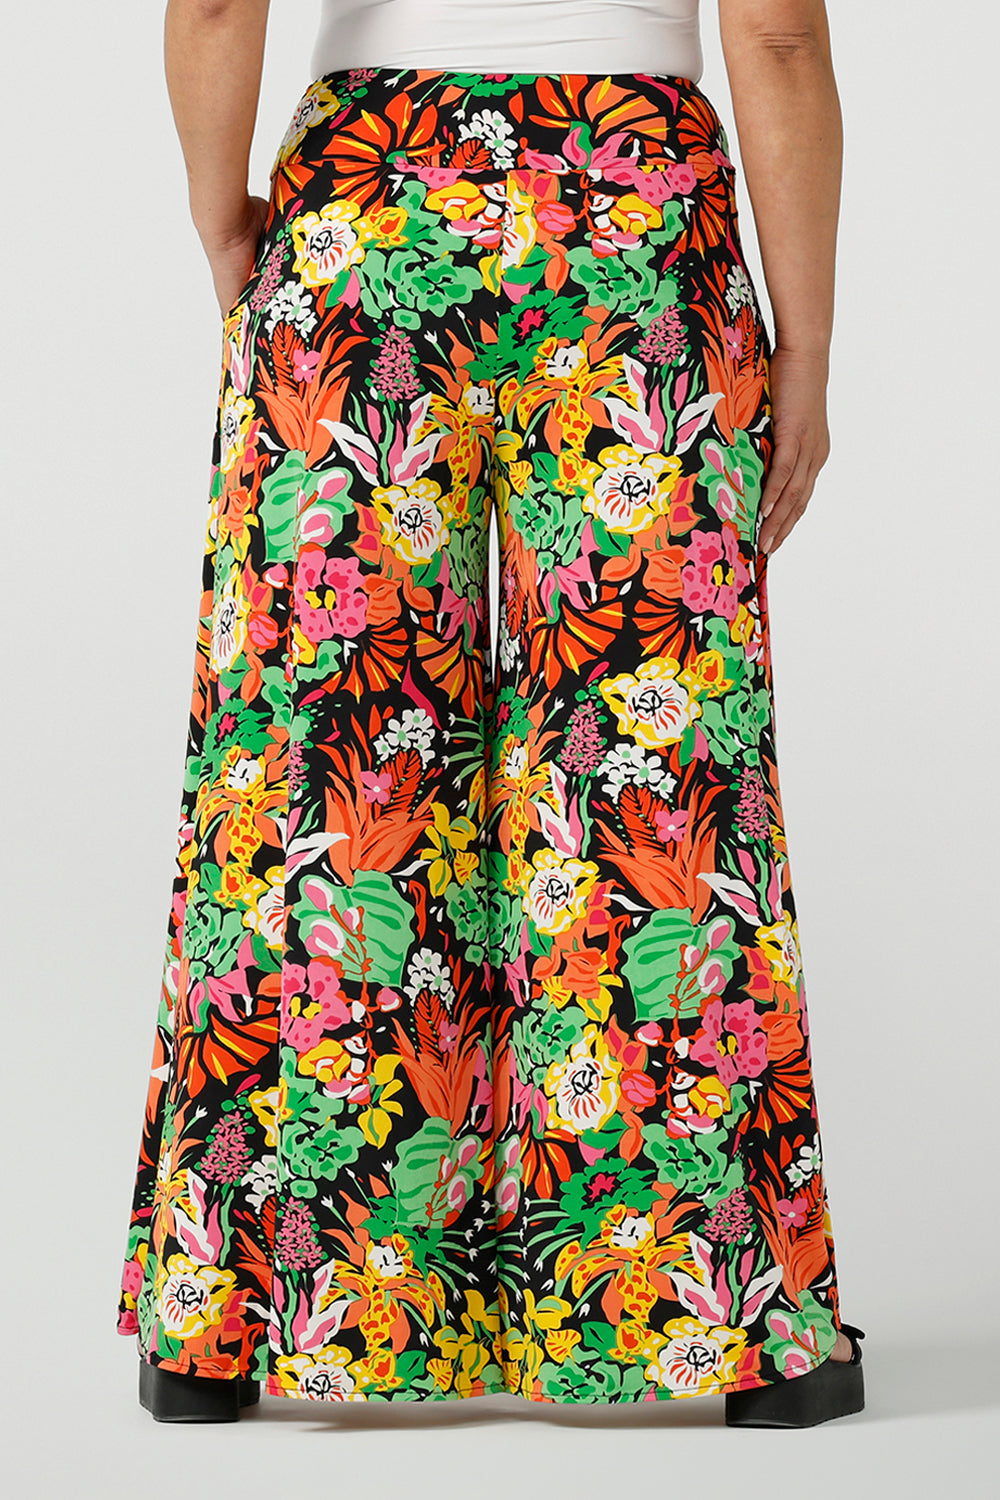 Back view of a size 12 woman wearing the Caspian Palazzo pant n a beautiful bright colourful print. In soft and lightweight jersey this pant features side pocket and a wide leg opening. Styled back with a black cami top and platform sandals. A perfect look for weekend wear. Made in Australia size 8-24.